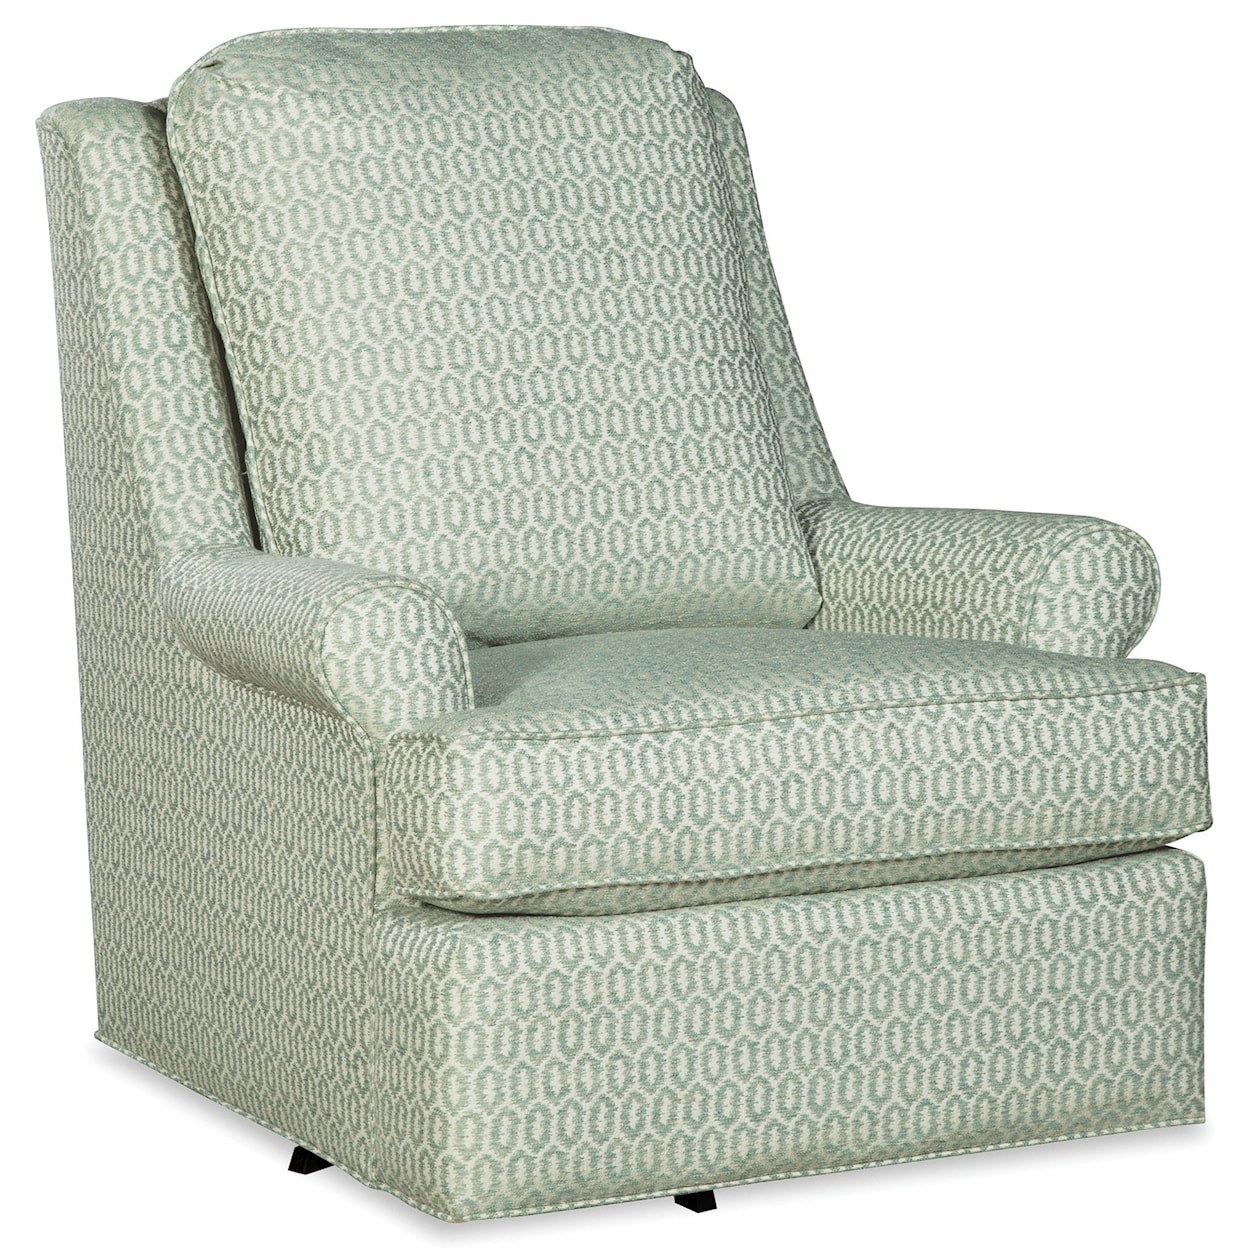 PD Cottage by Craftmaster Upholstered Chairs Swivel Glider Chair